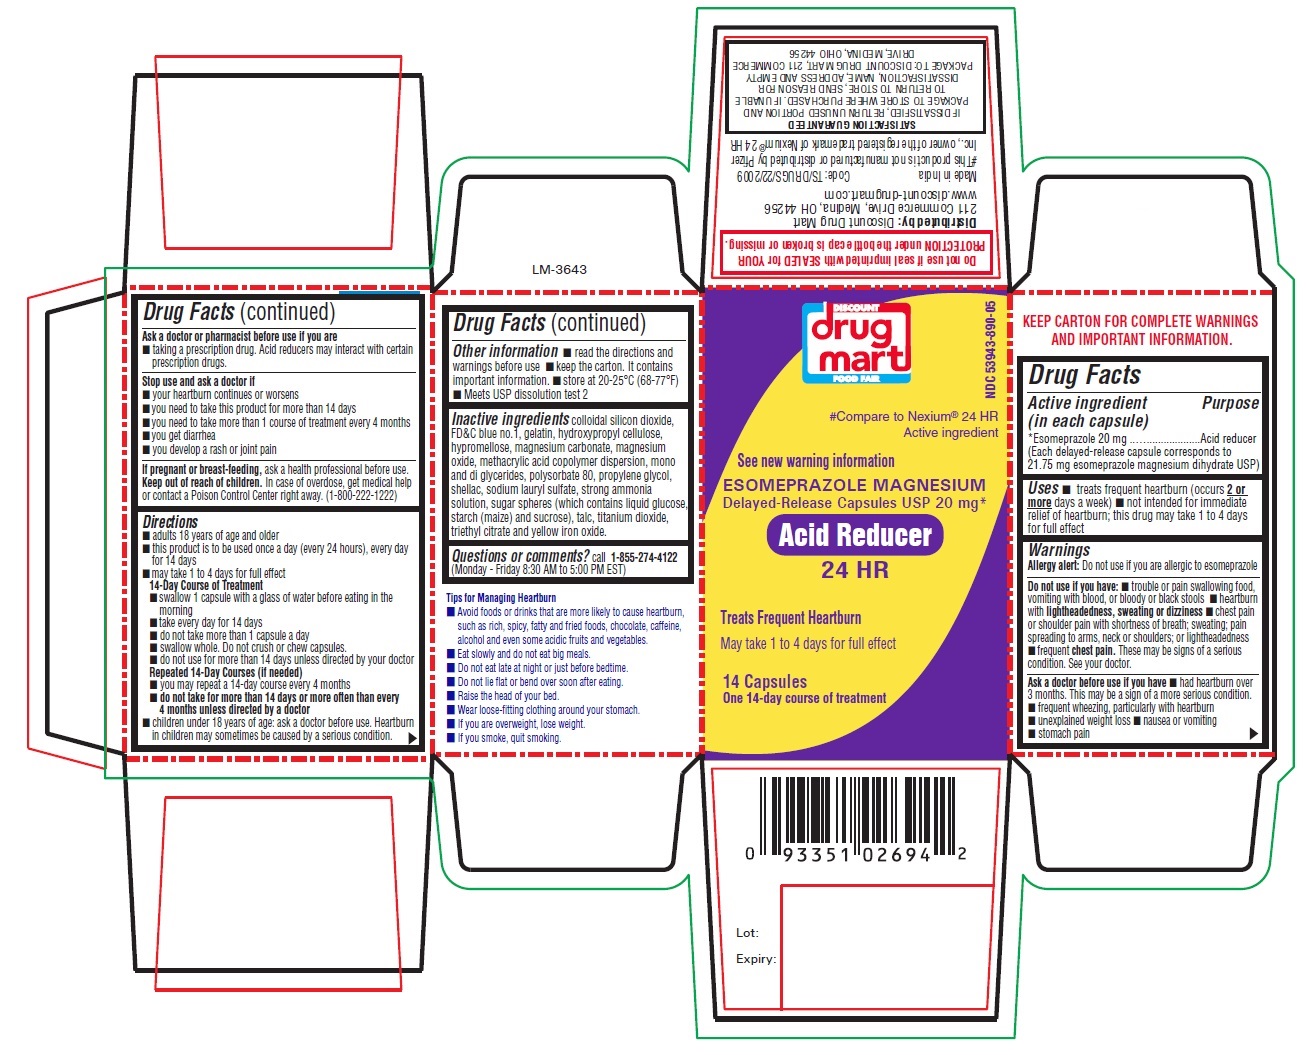 PACKAGE LABEL-PRINCIPAL DISPLAY PANEL - 20 mg (14 Capsules Container Carton)